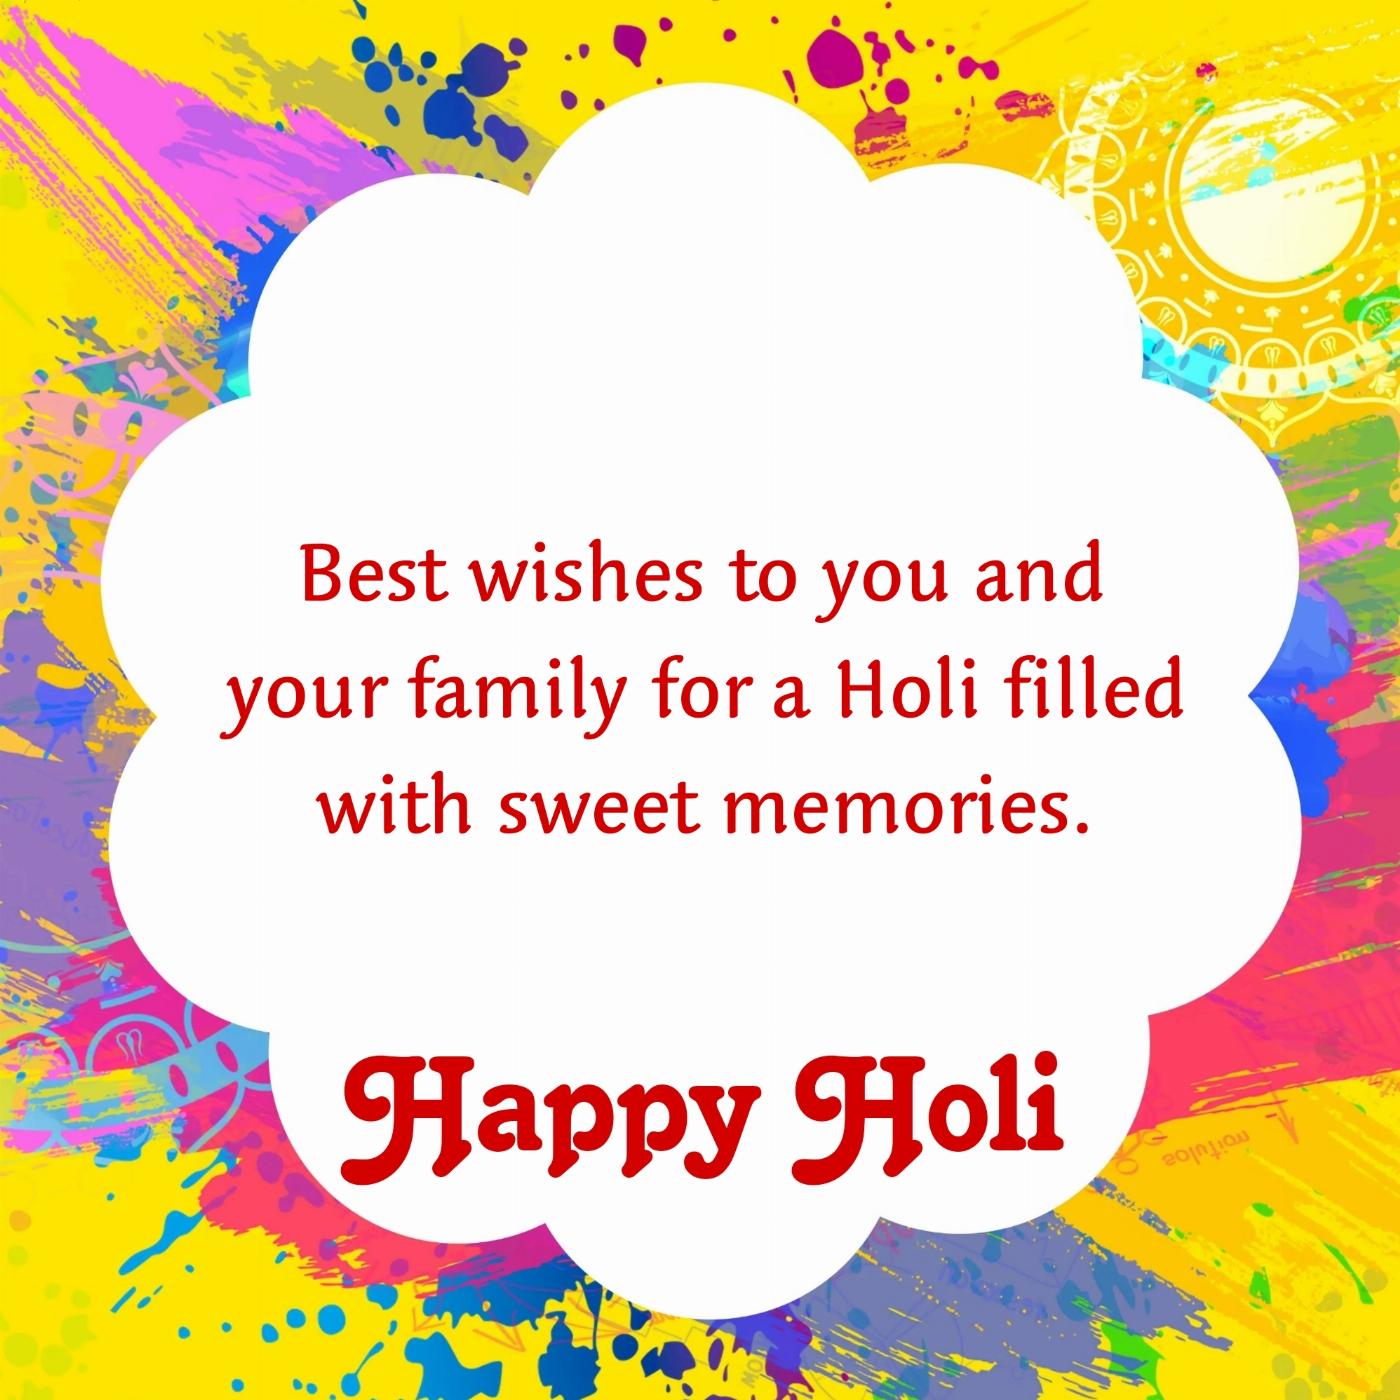 Best wishes to you and your family for a Holi filled with sweet memories